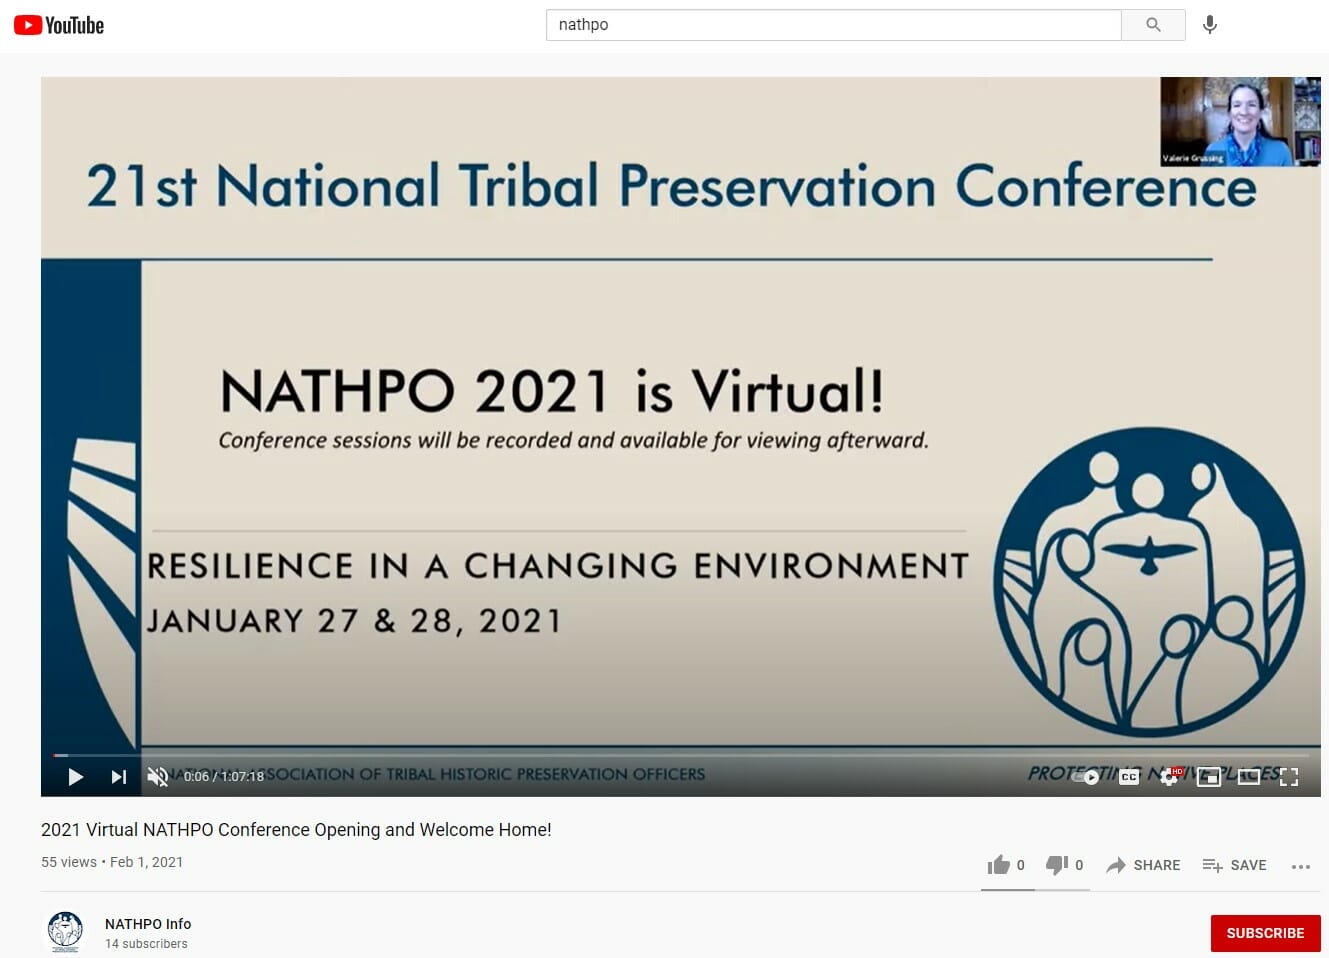 2021 Virtual NATHPO Conference Opening and Welcome Home!